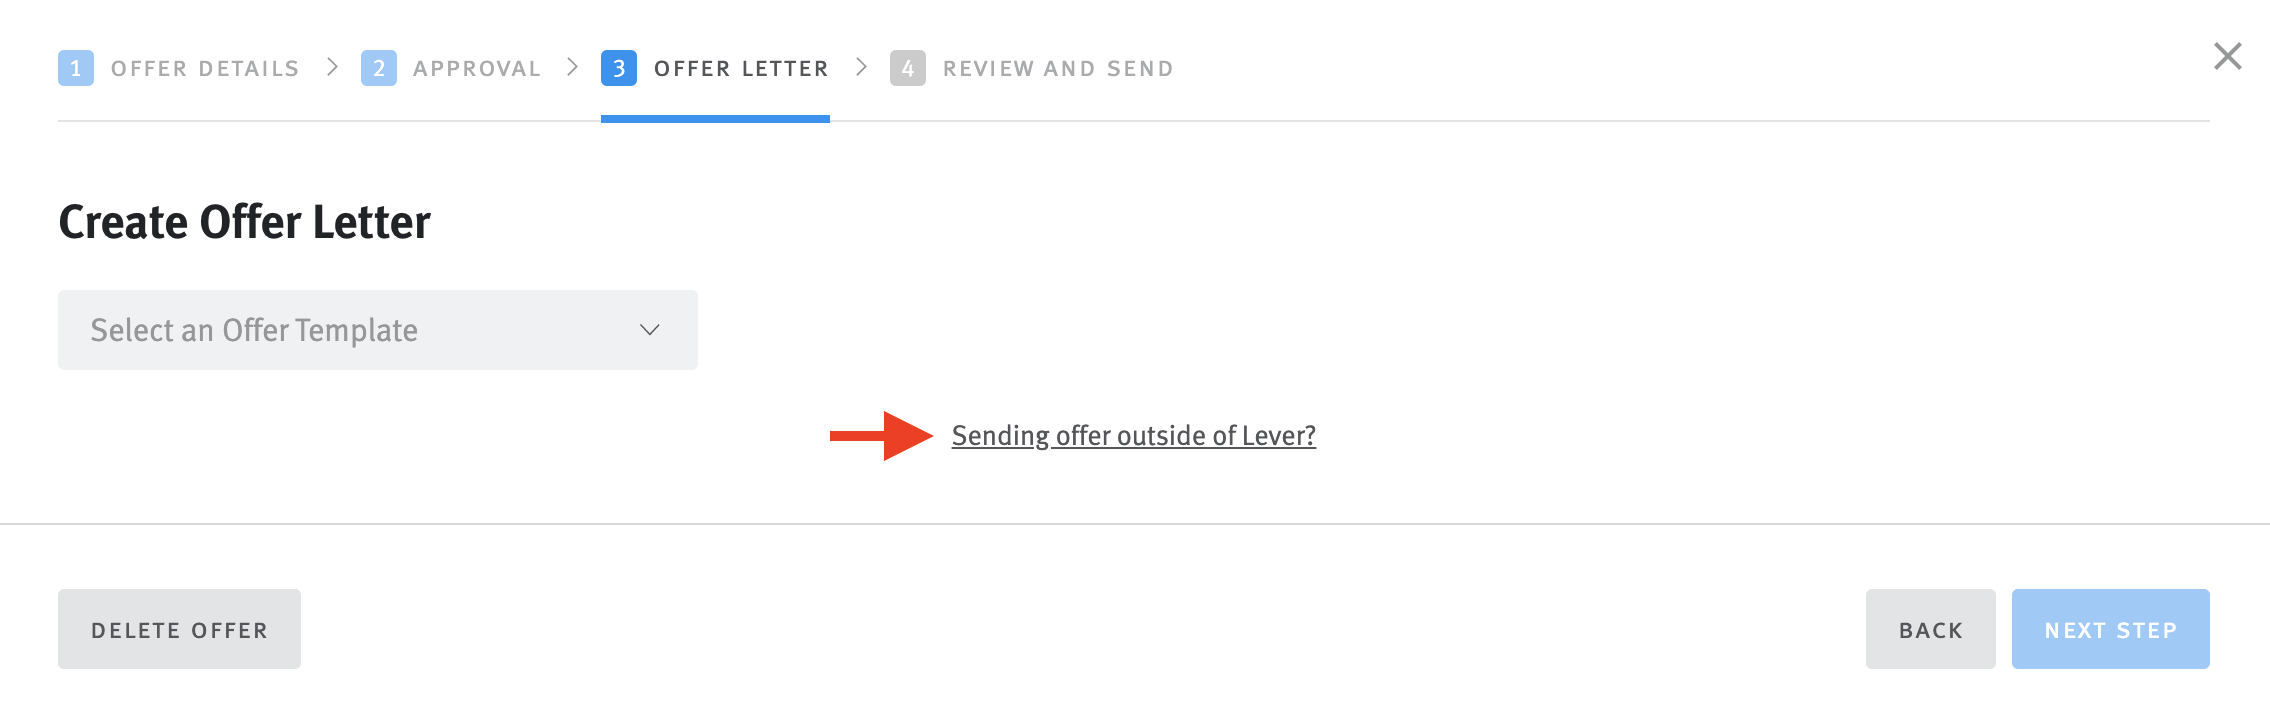 Arrow pointing to Sending offer outside of Lever link below offer letter template menu.